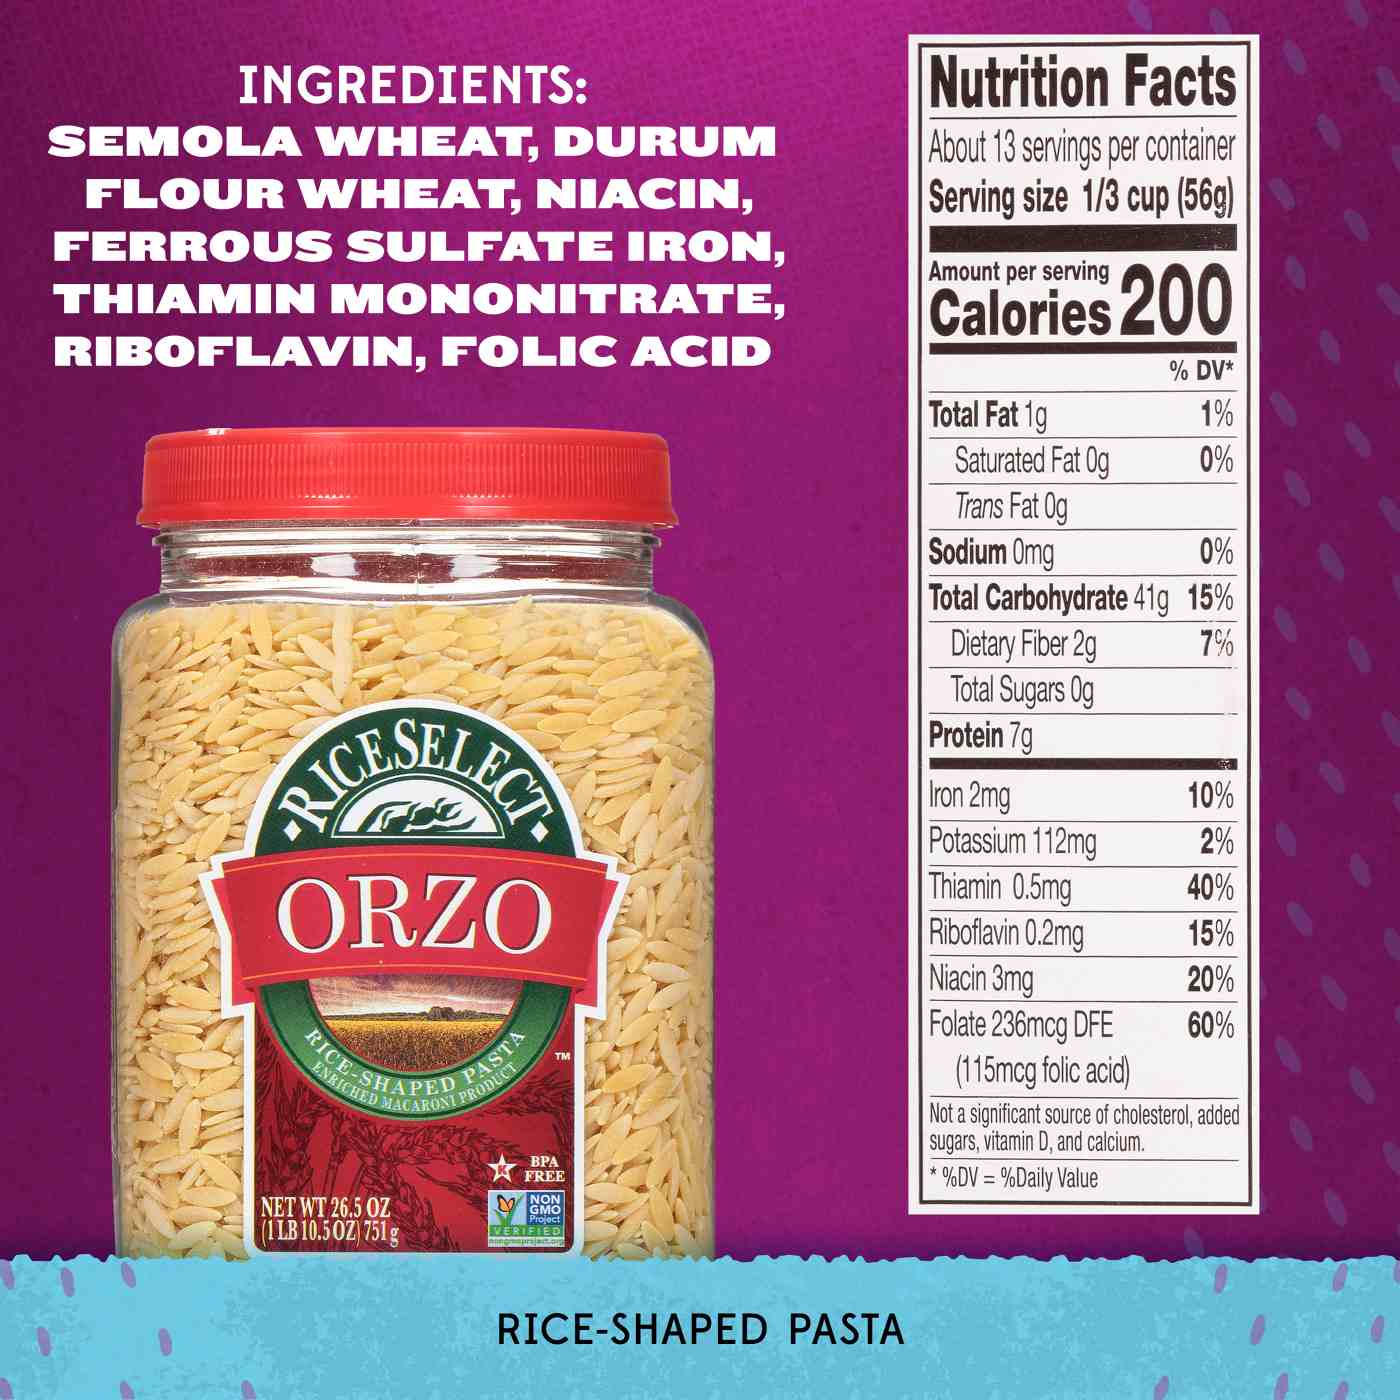 RiceSelect Original Orzo; image 3 of 6